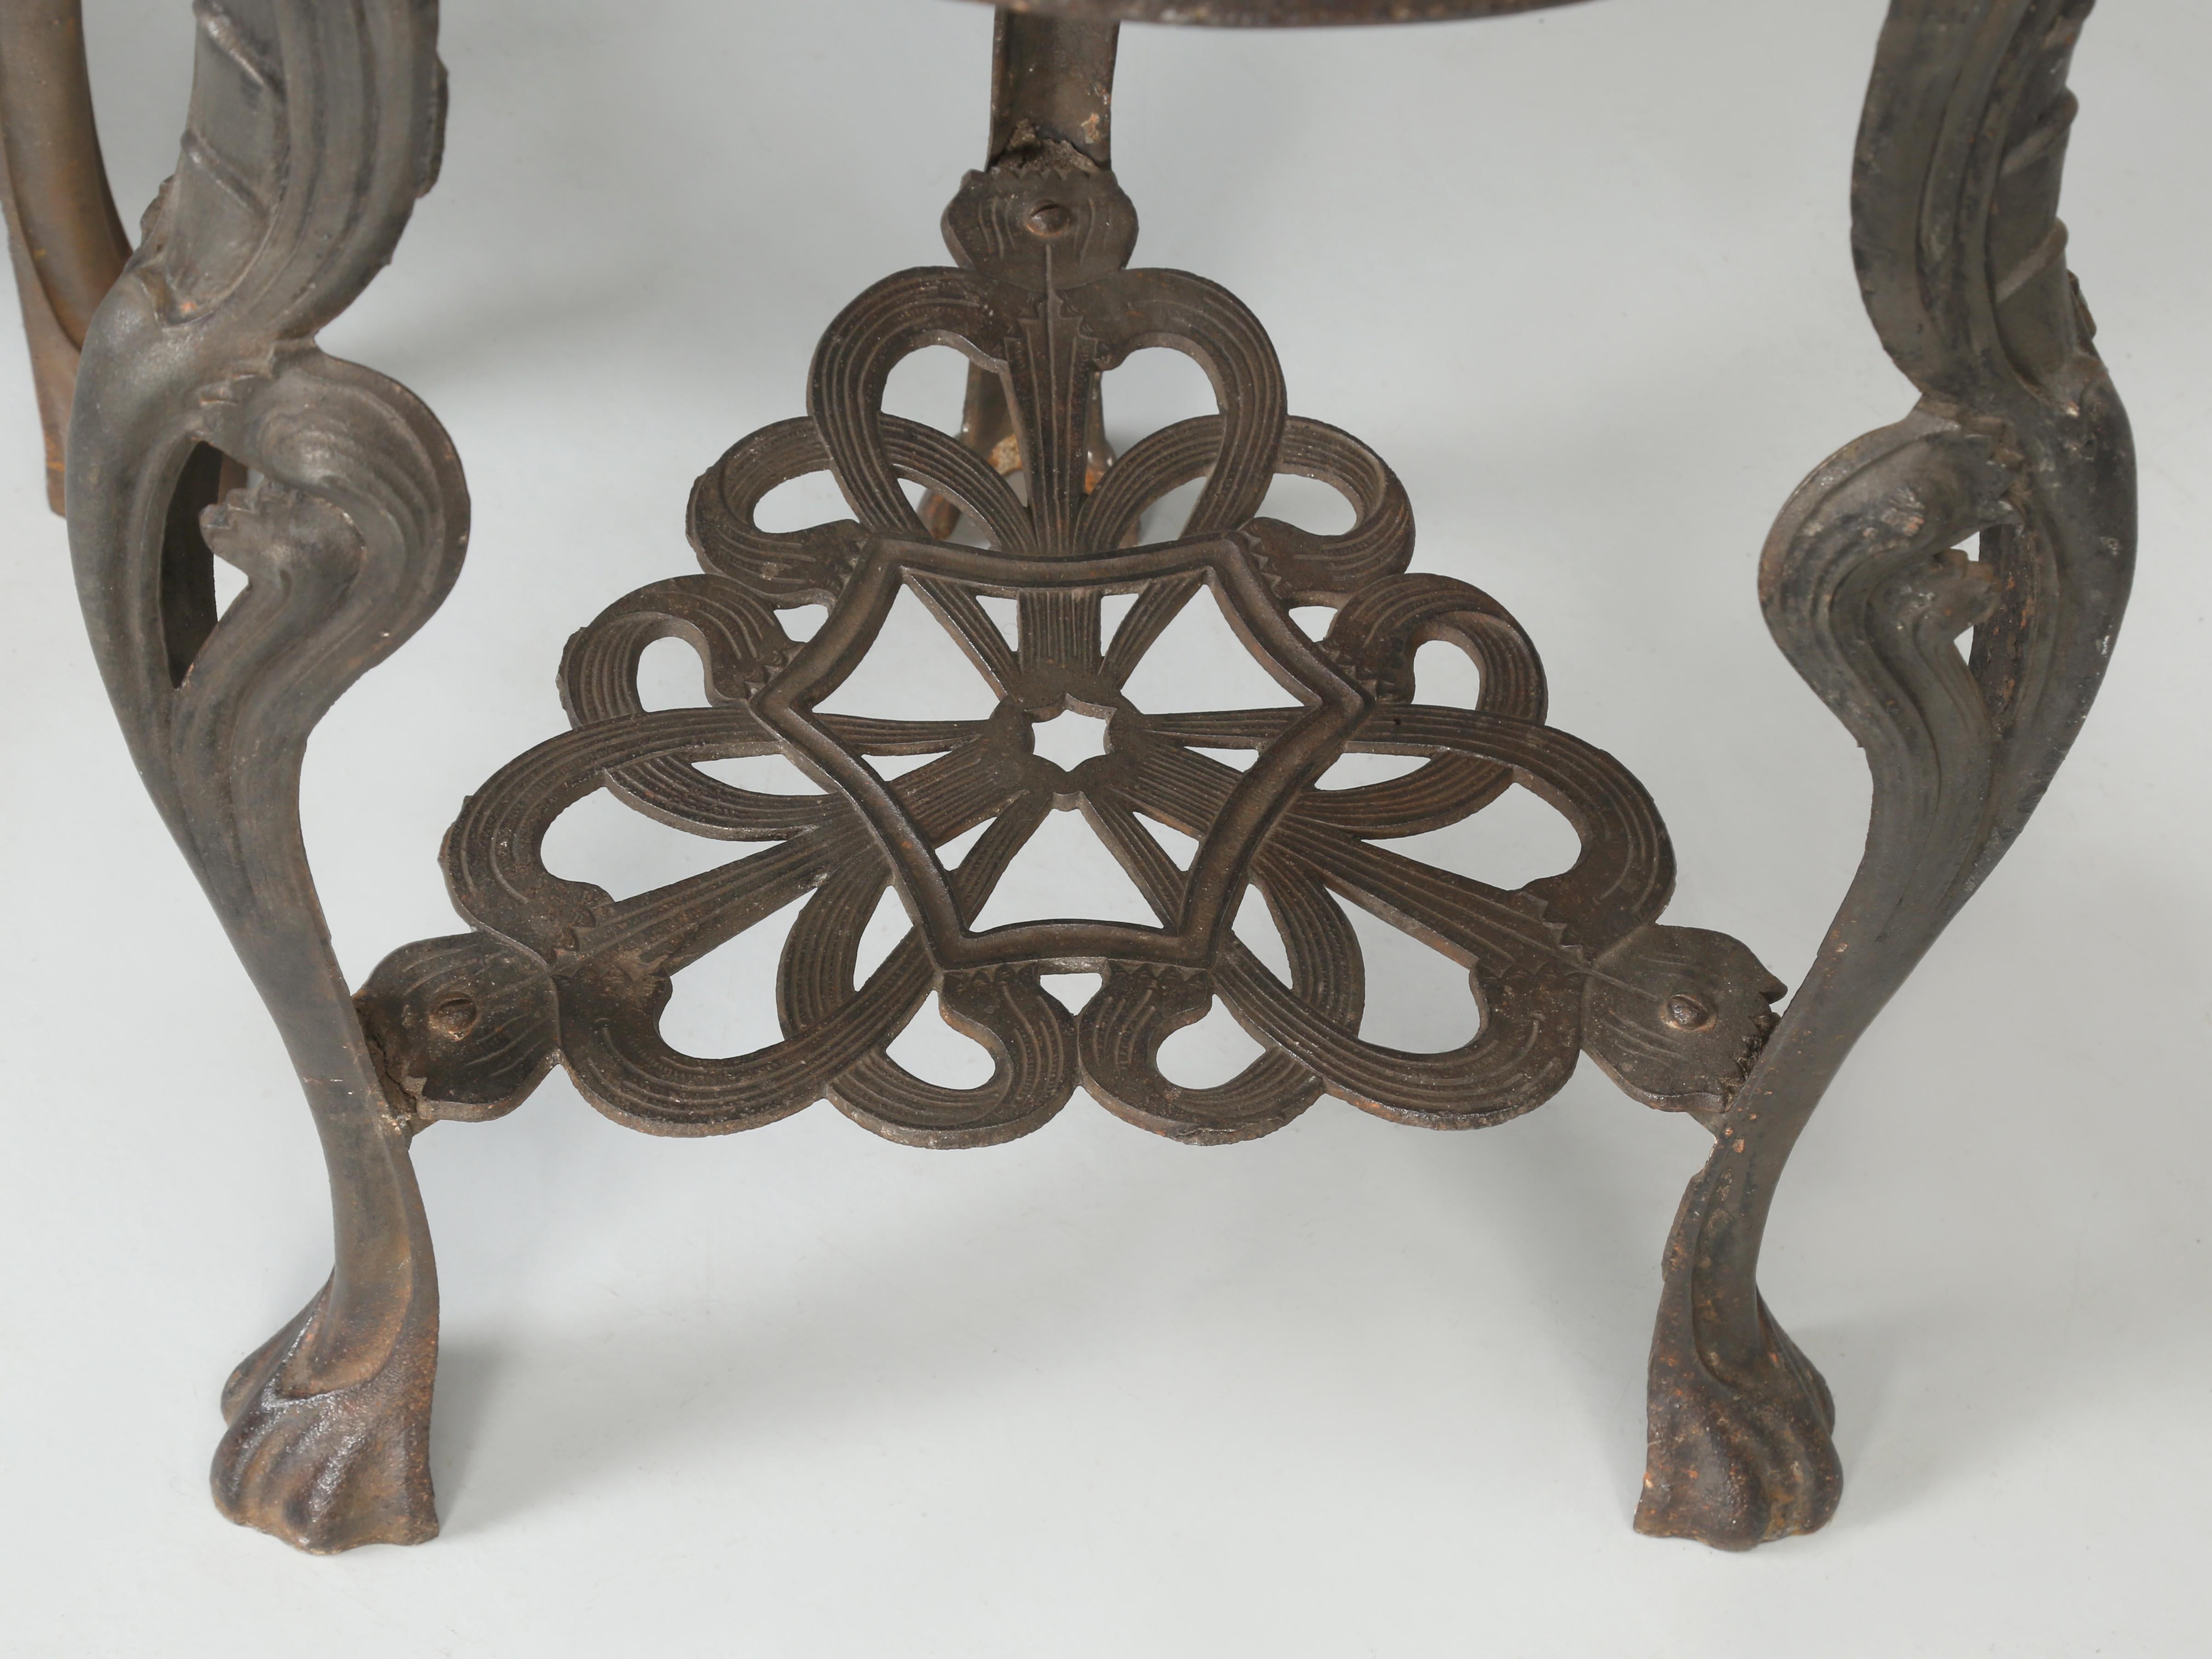 Near Pair of French Art Nouveau Guéridon Cast Iron Tables with Stone Tops For Sale 8